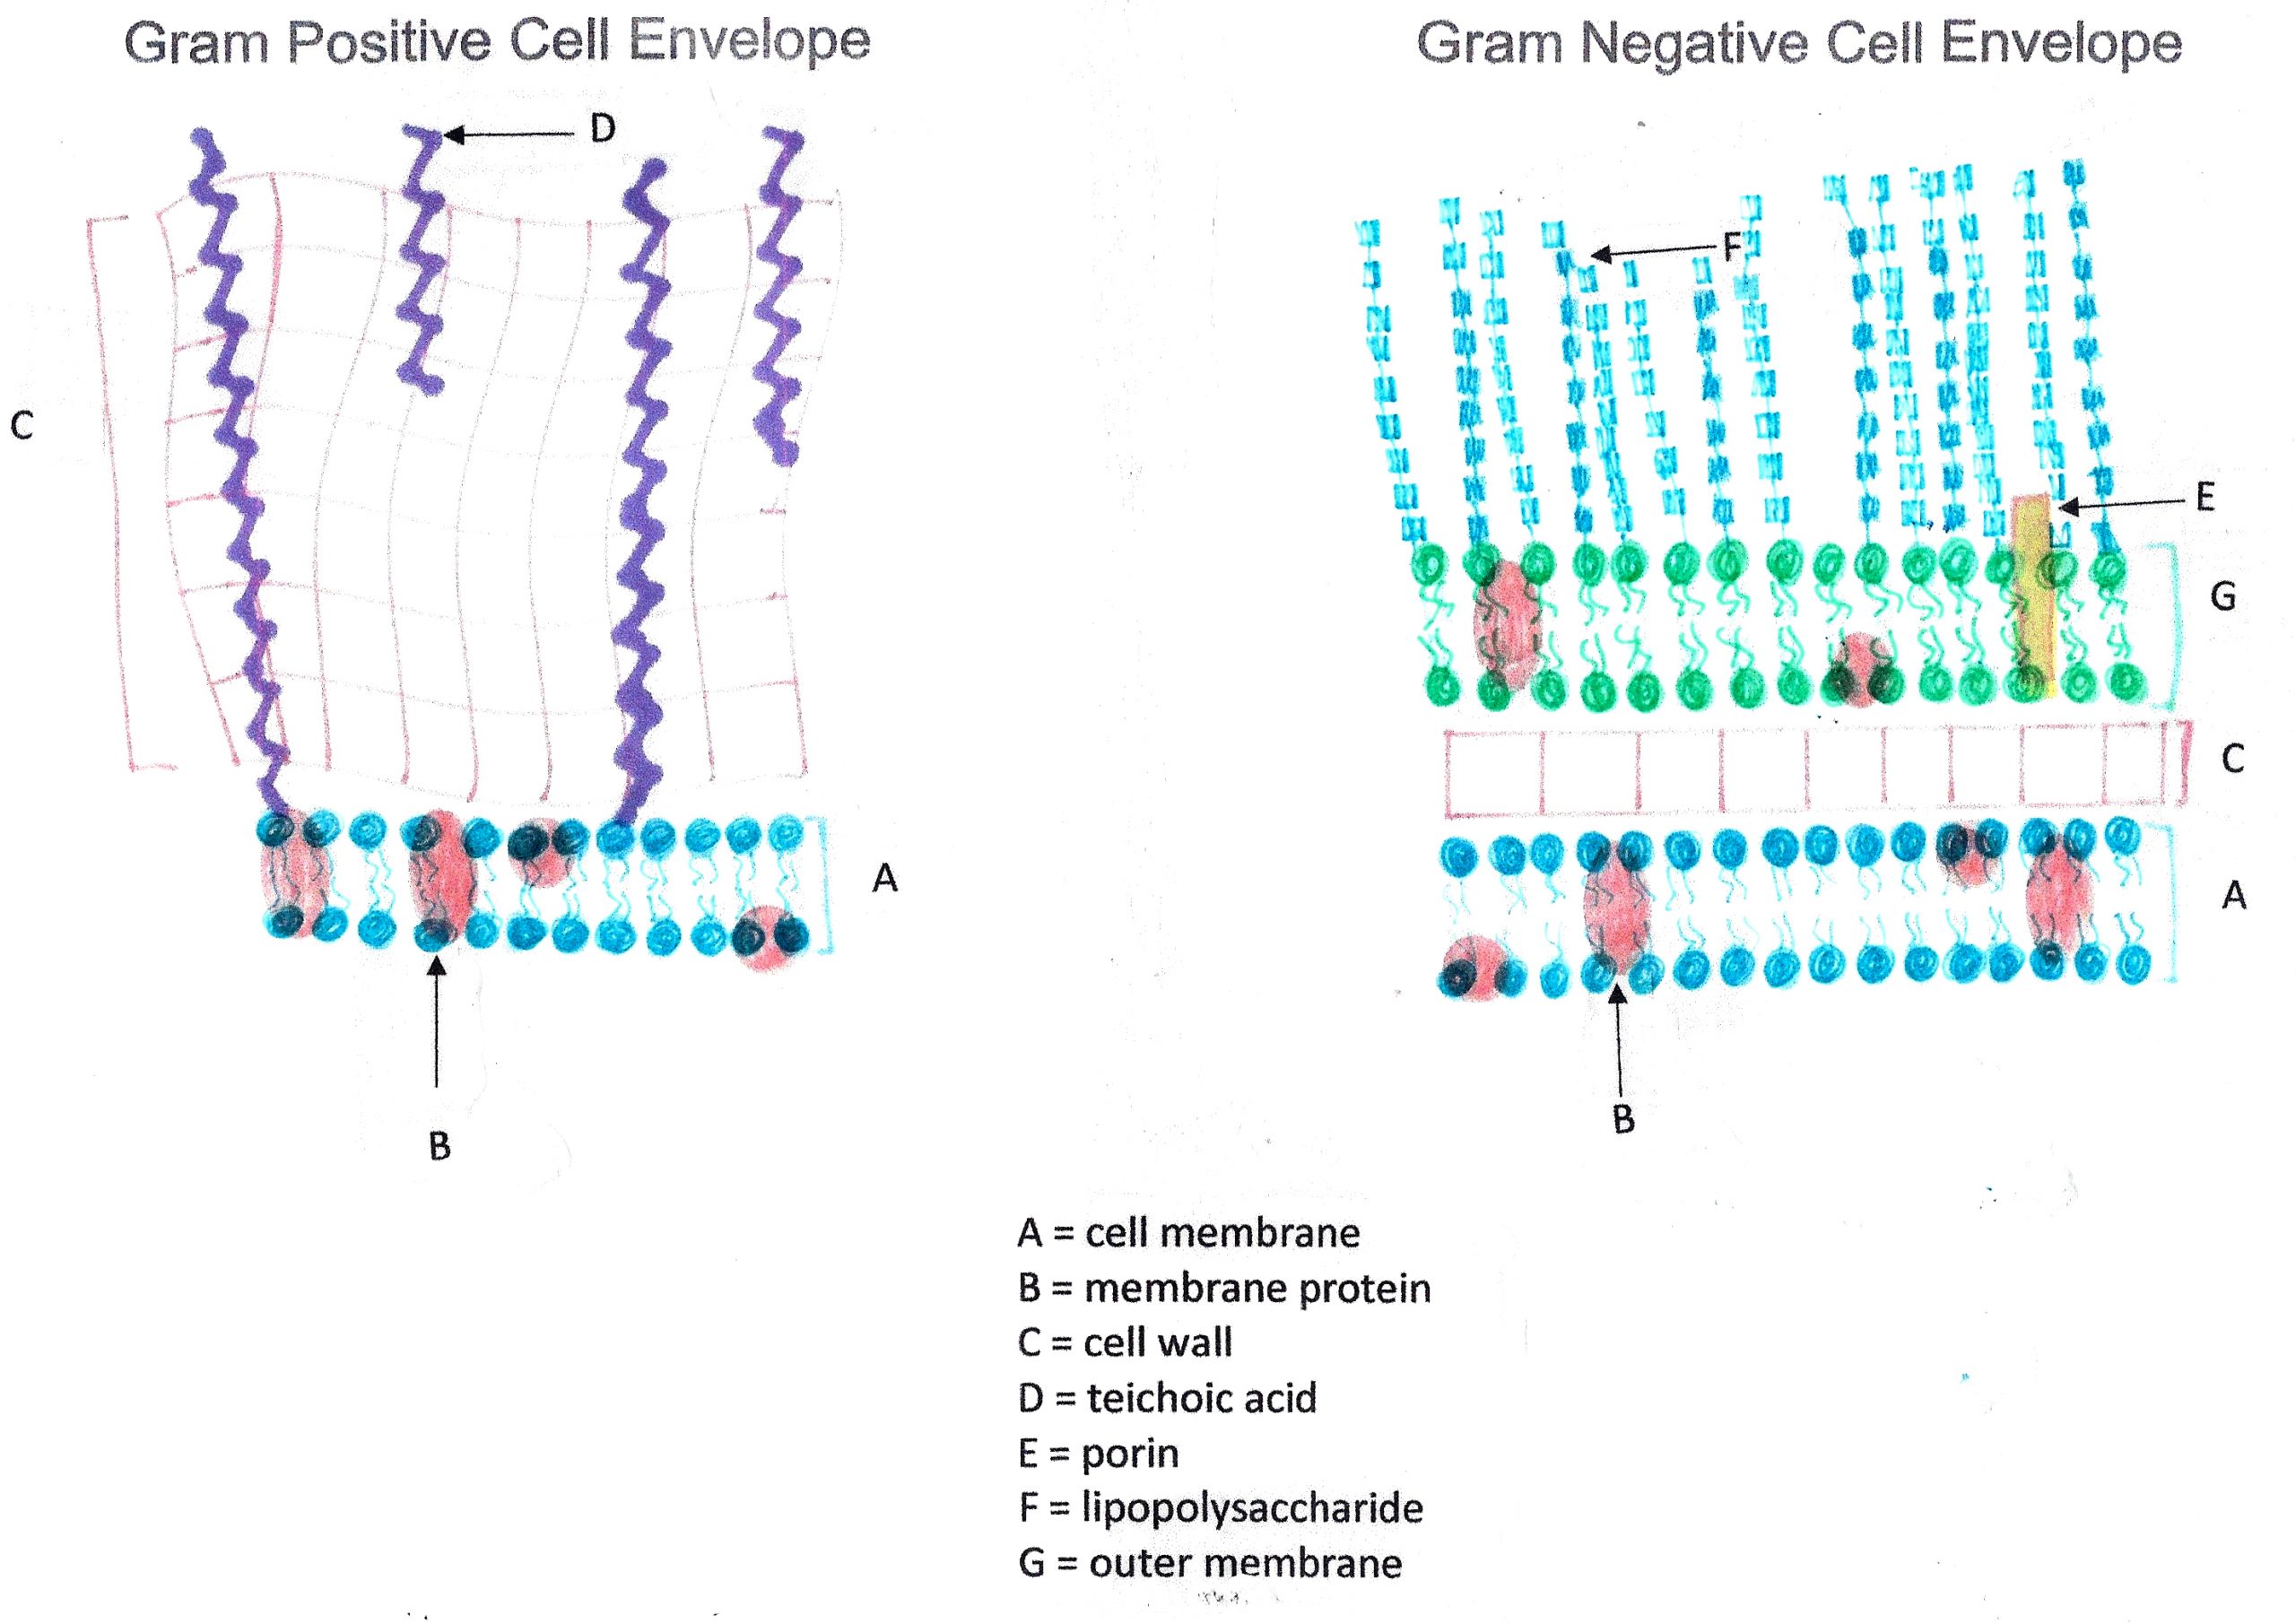 Cell Envelope of Gram-positive and Gram-negative Bacteria